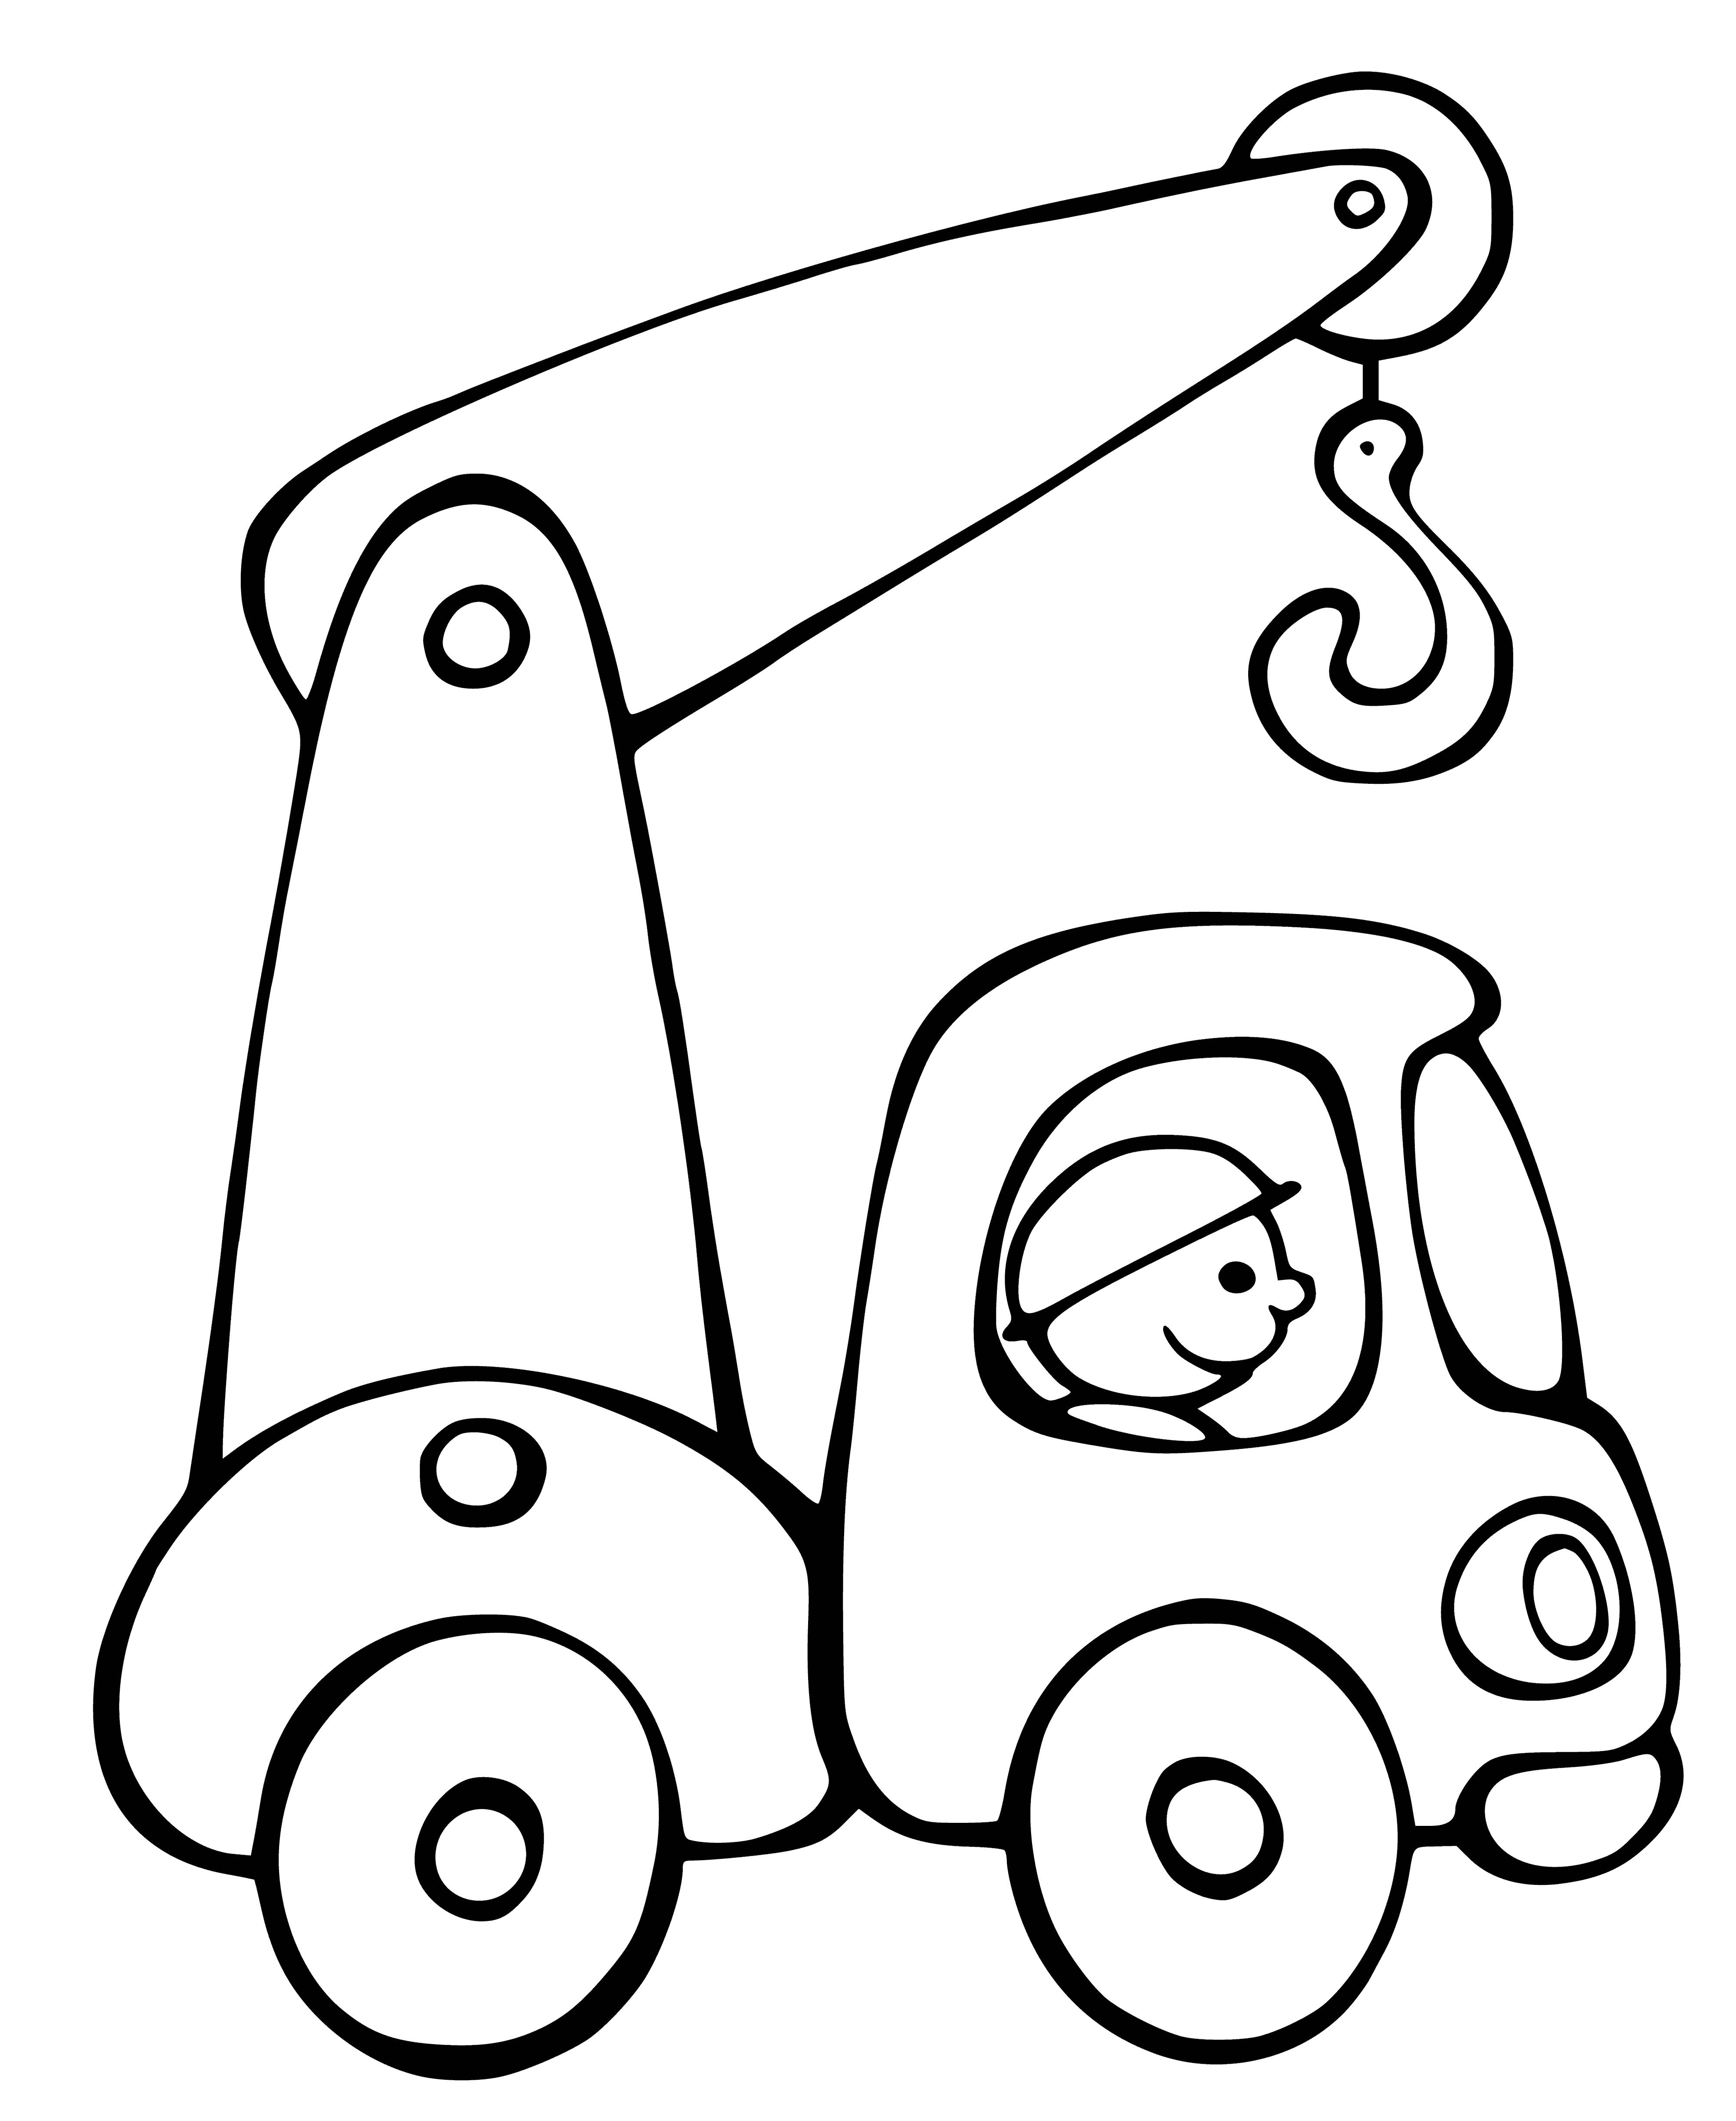 coloring page: Black & white coloring page of a hand holding a phone open on Tap transport app.